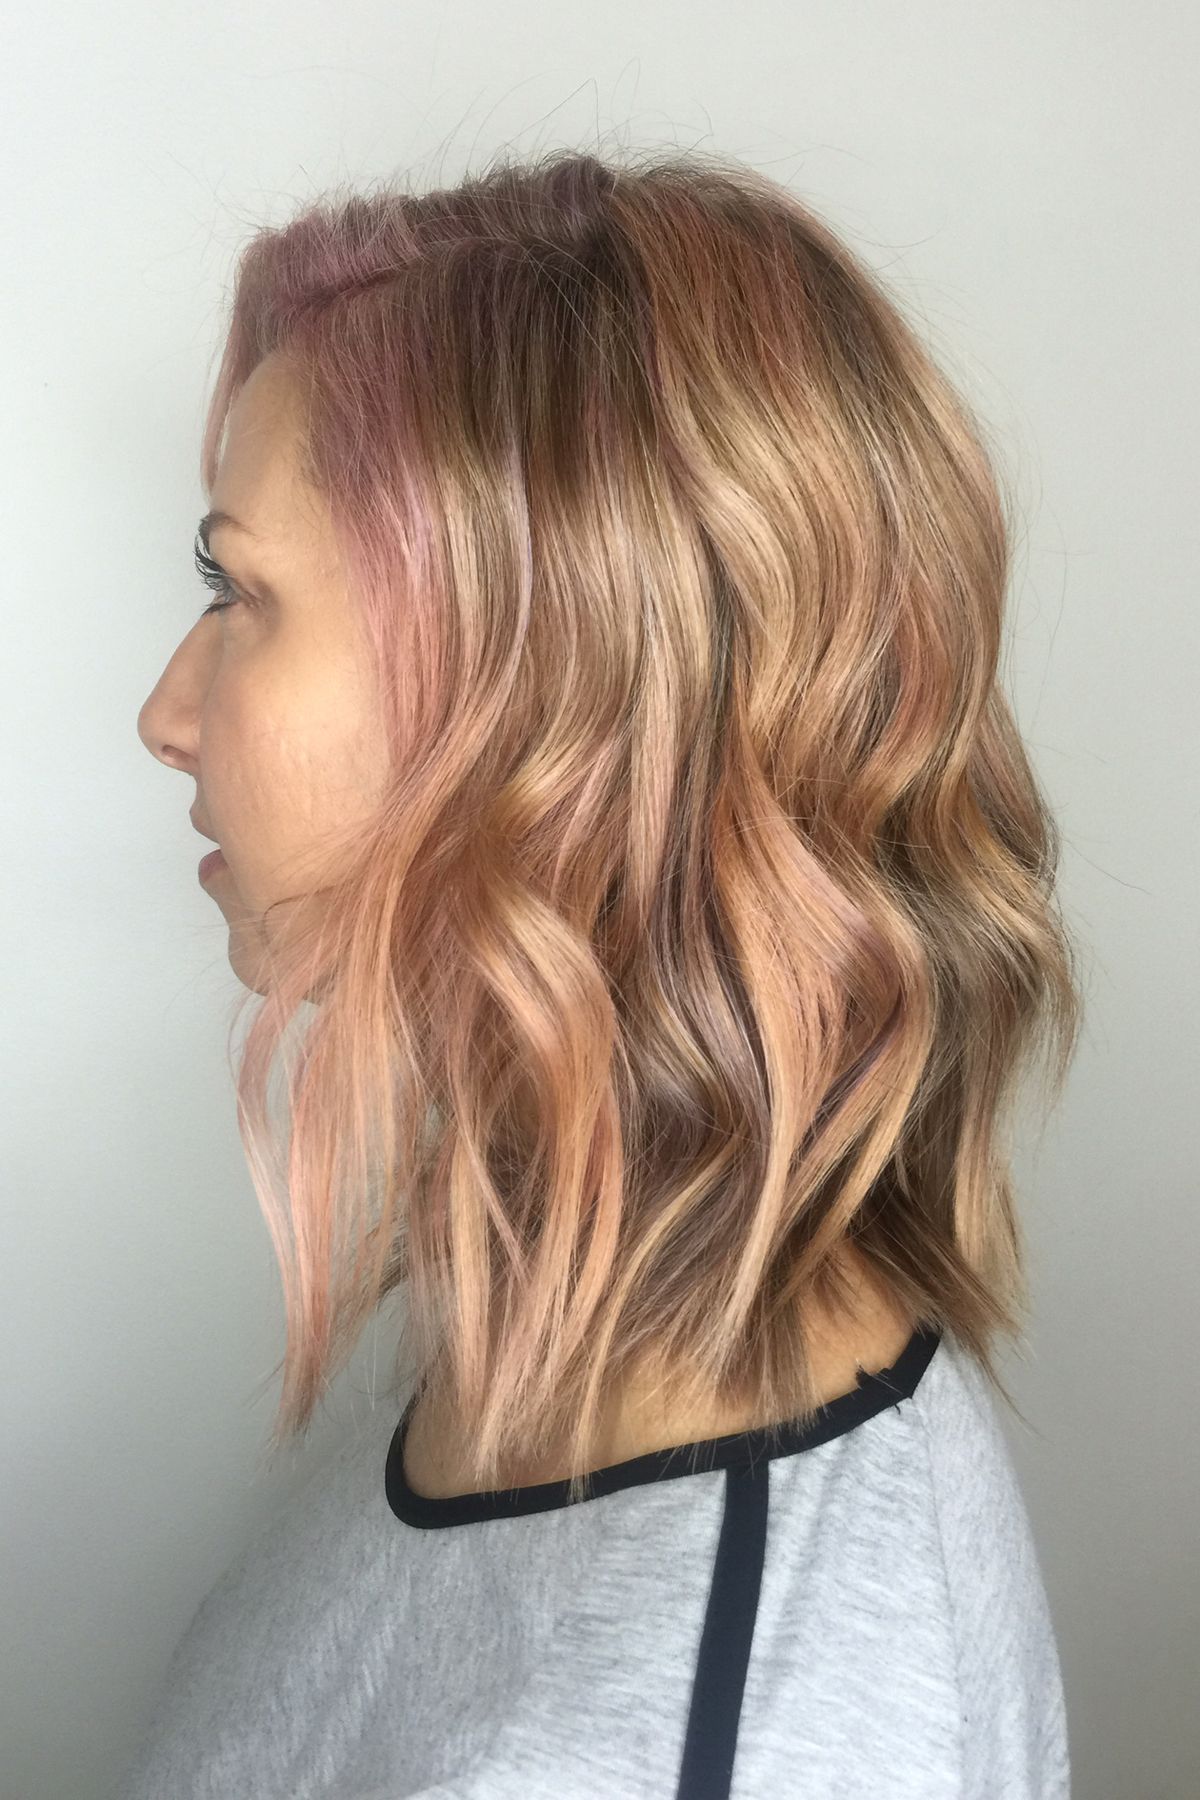 15 Subtle Hair Color Ideas - 15 Ways to Add a Pretty Touch of Color to Your  Hair